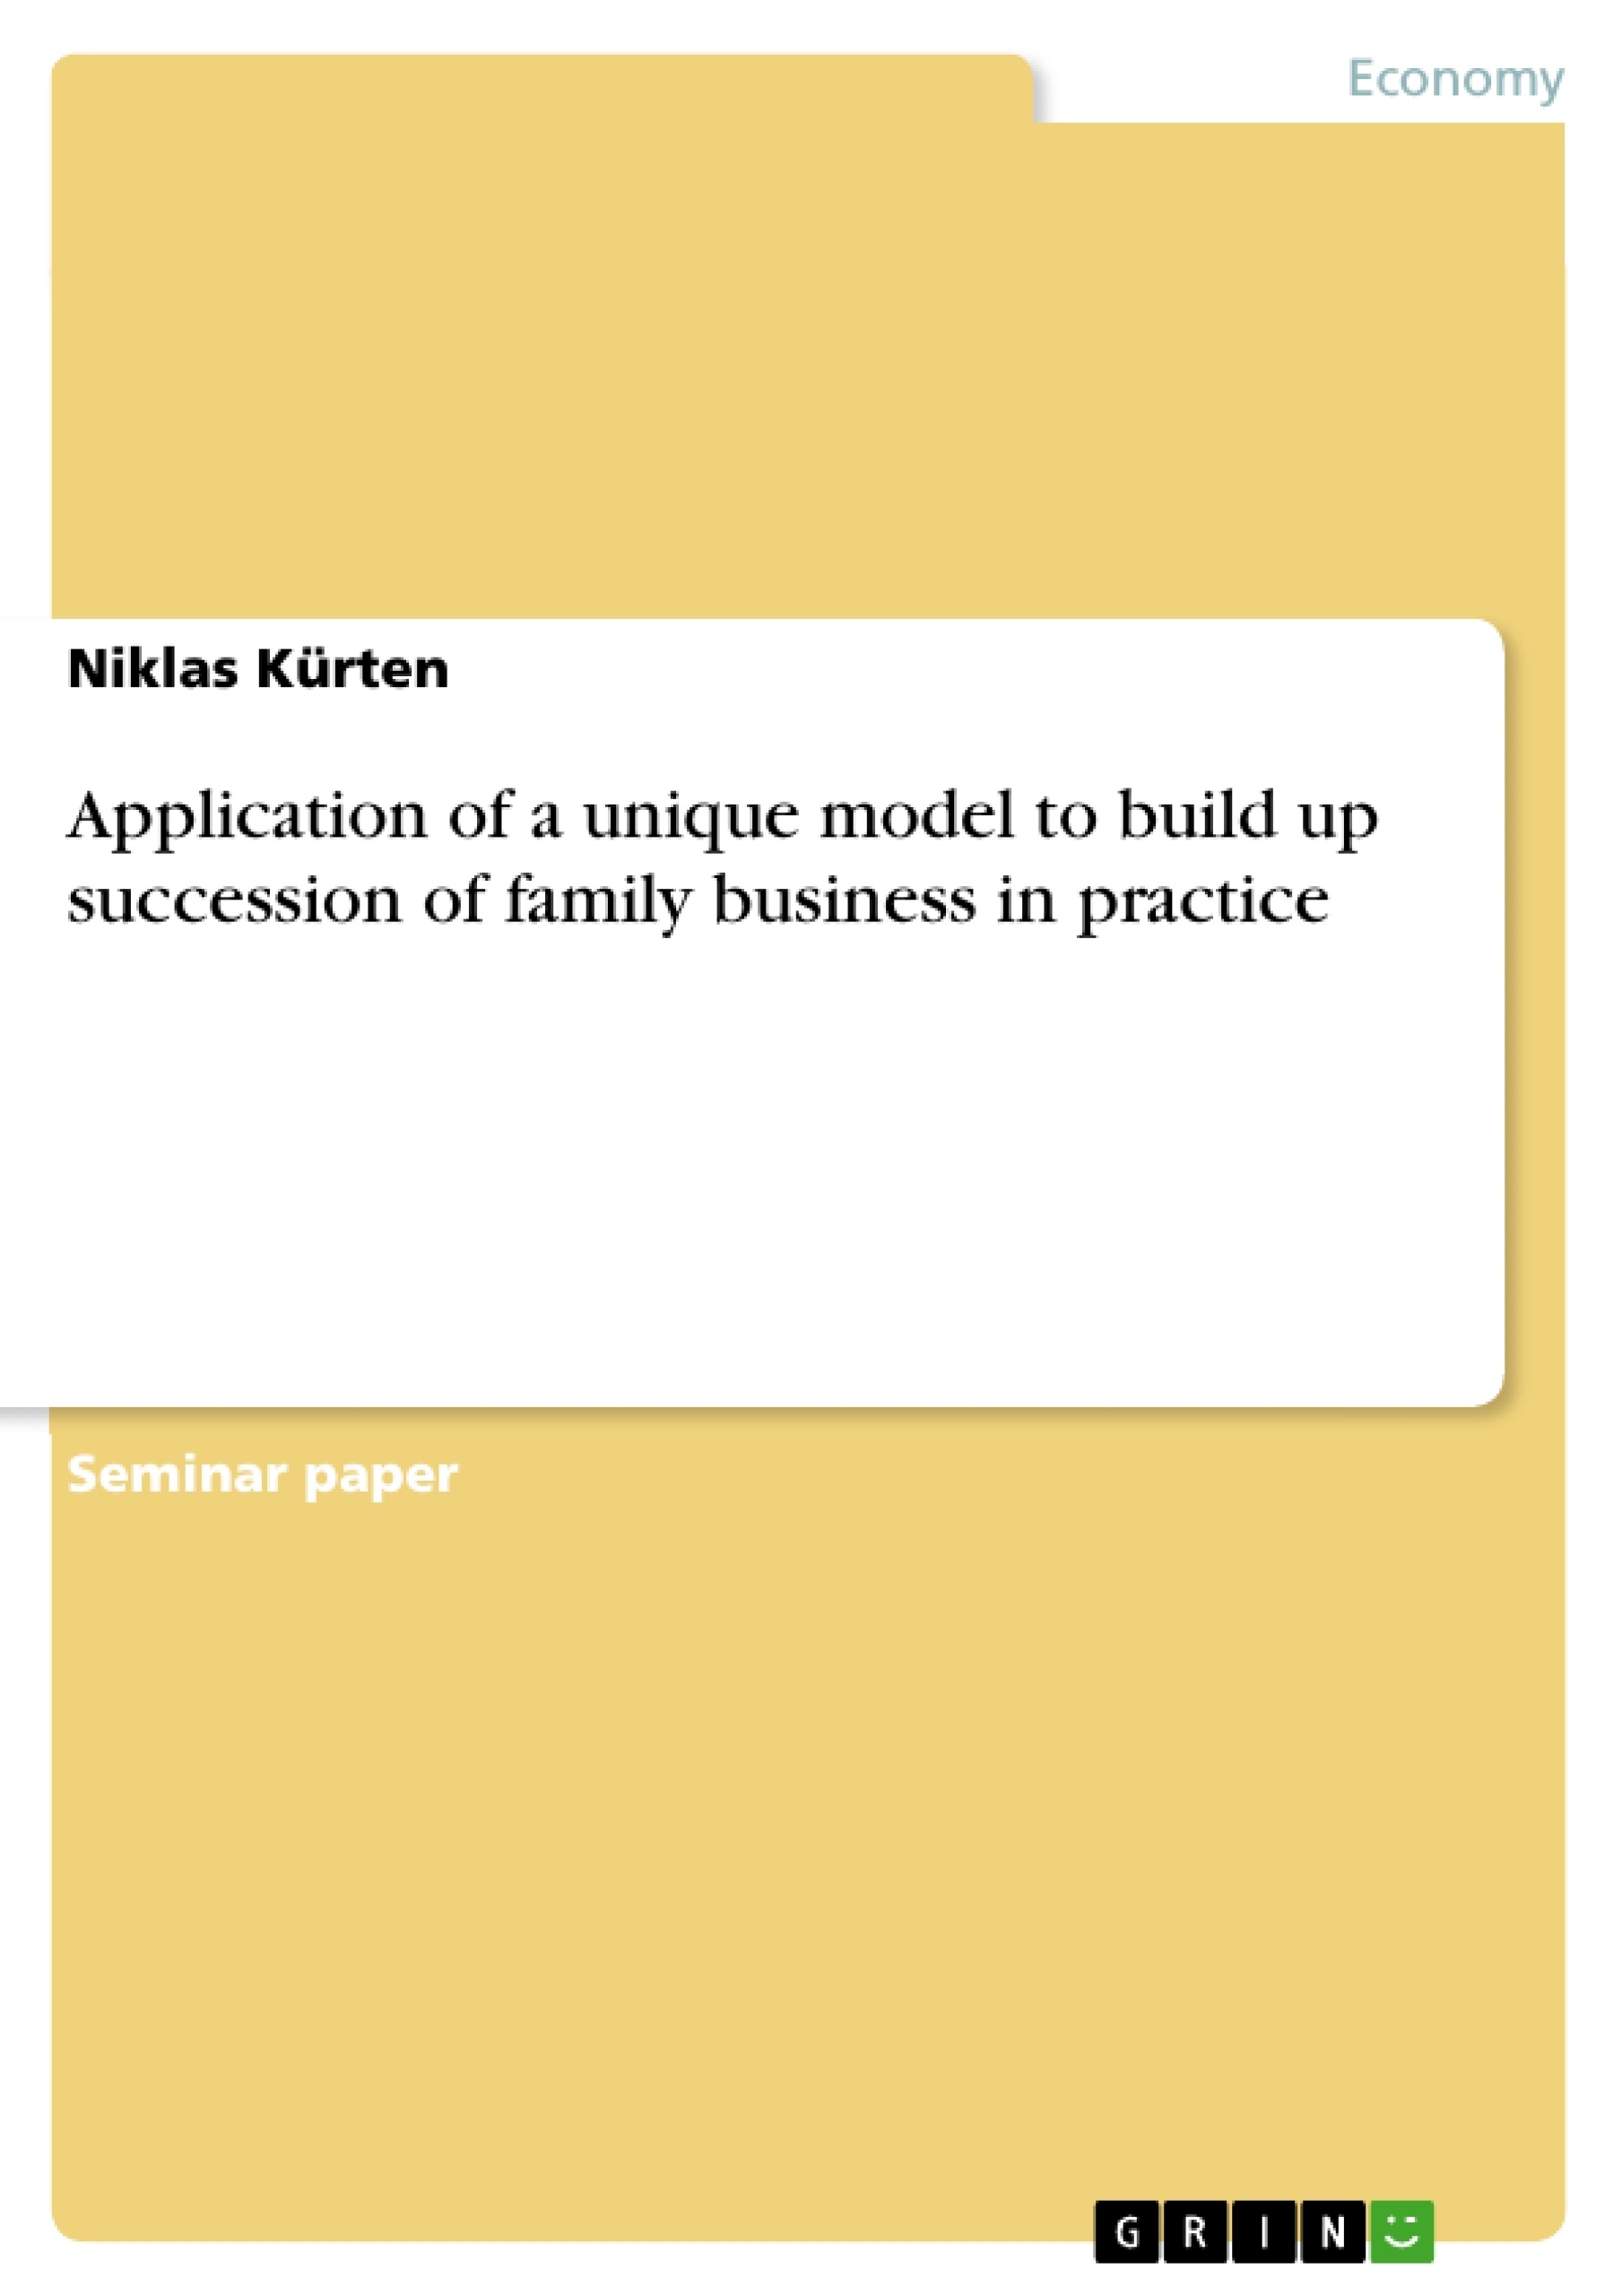 Título: Application of a unique model to build up succession of family business in practice